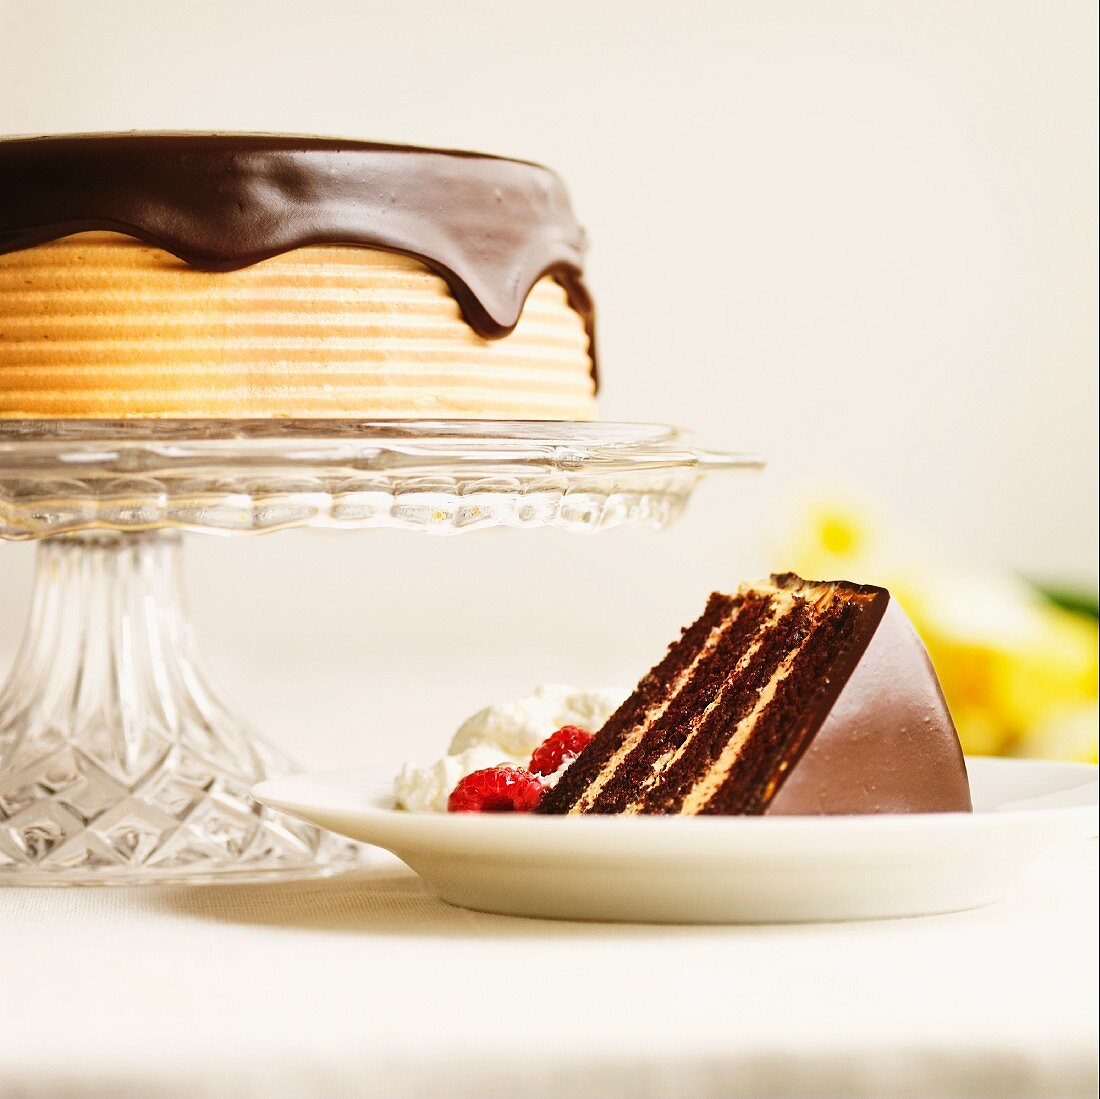 A slice of chocolate cake in front of a layer cake with chocolate topping